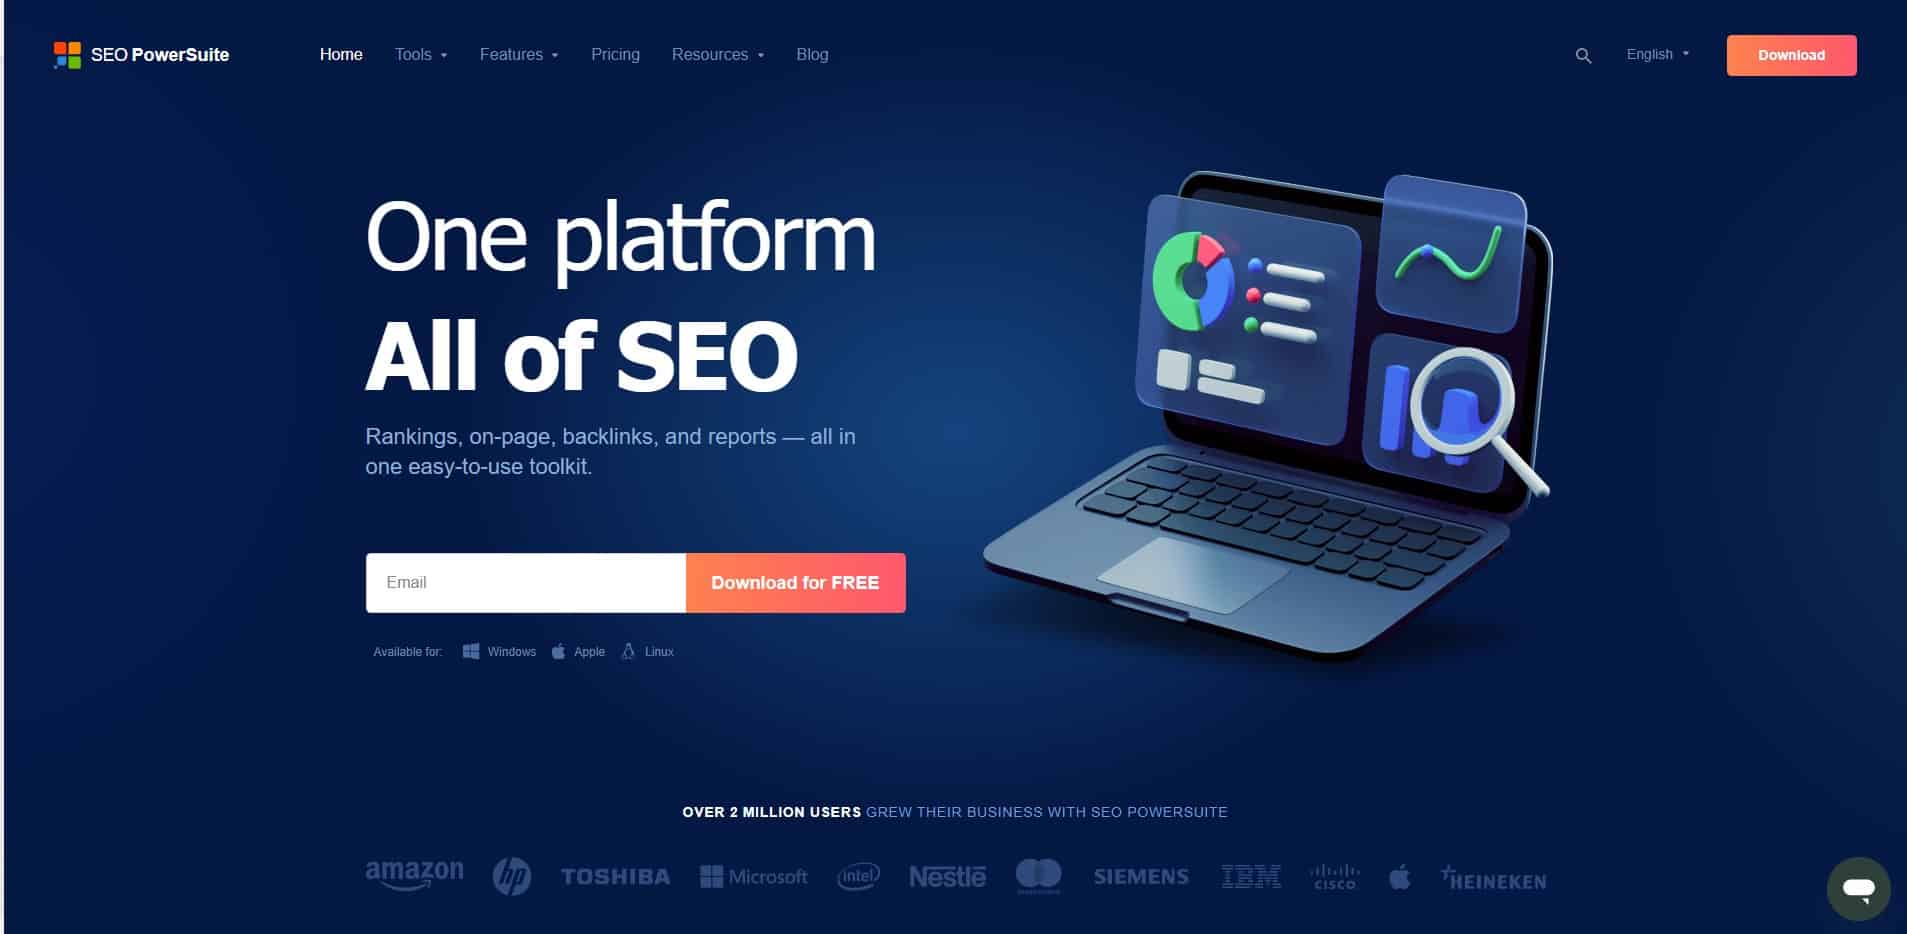 SEO PowerSuite is a desktop Ubersuggest alternative and competitor